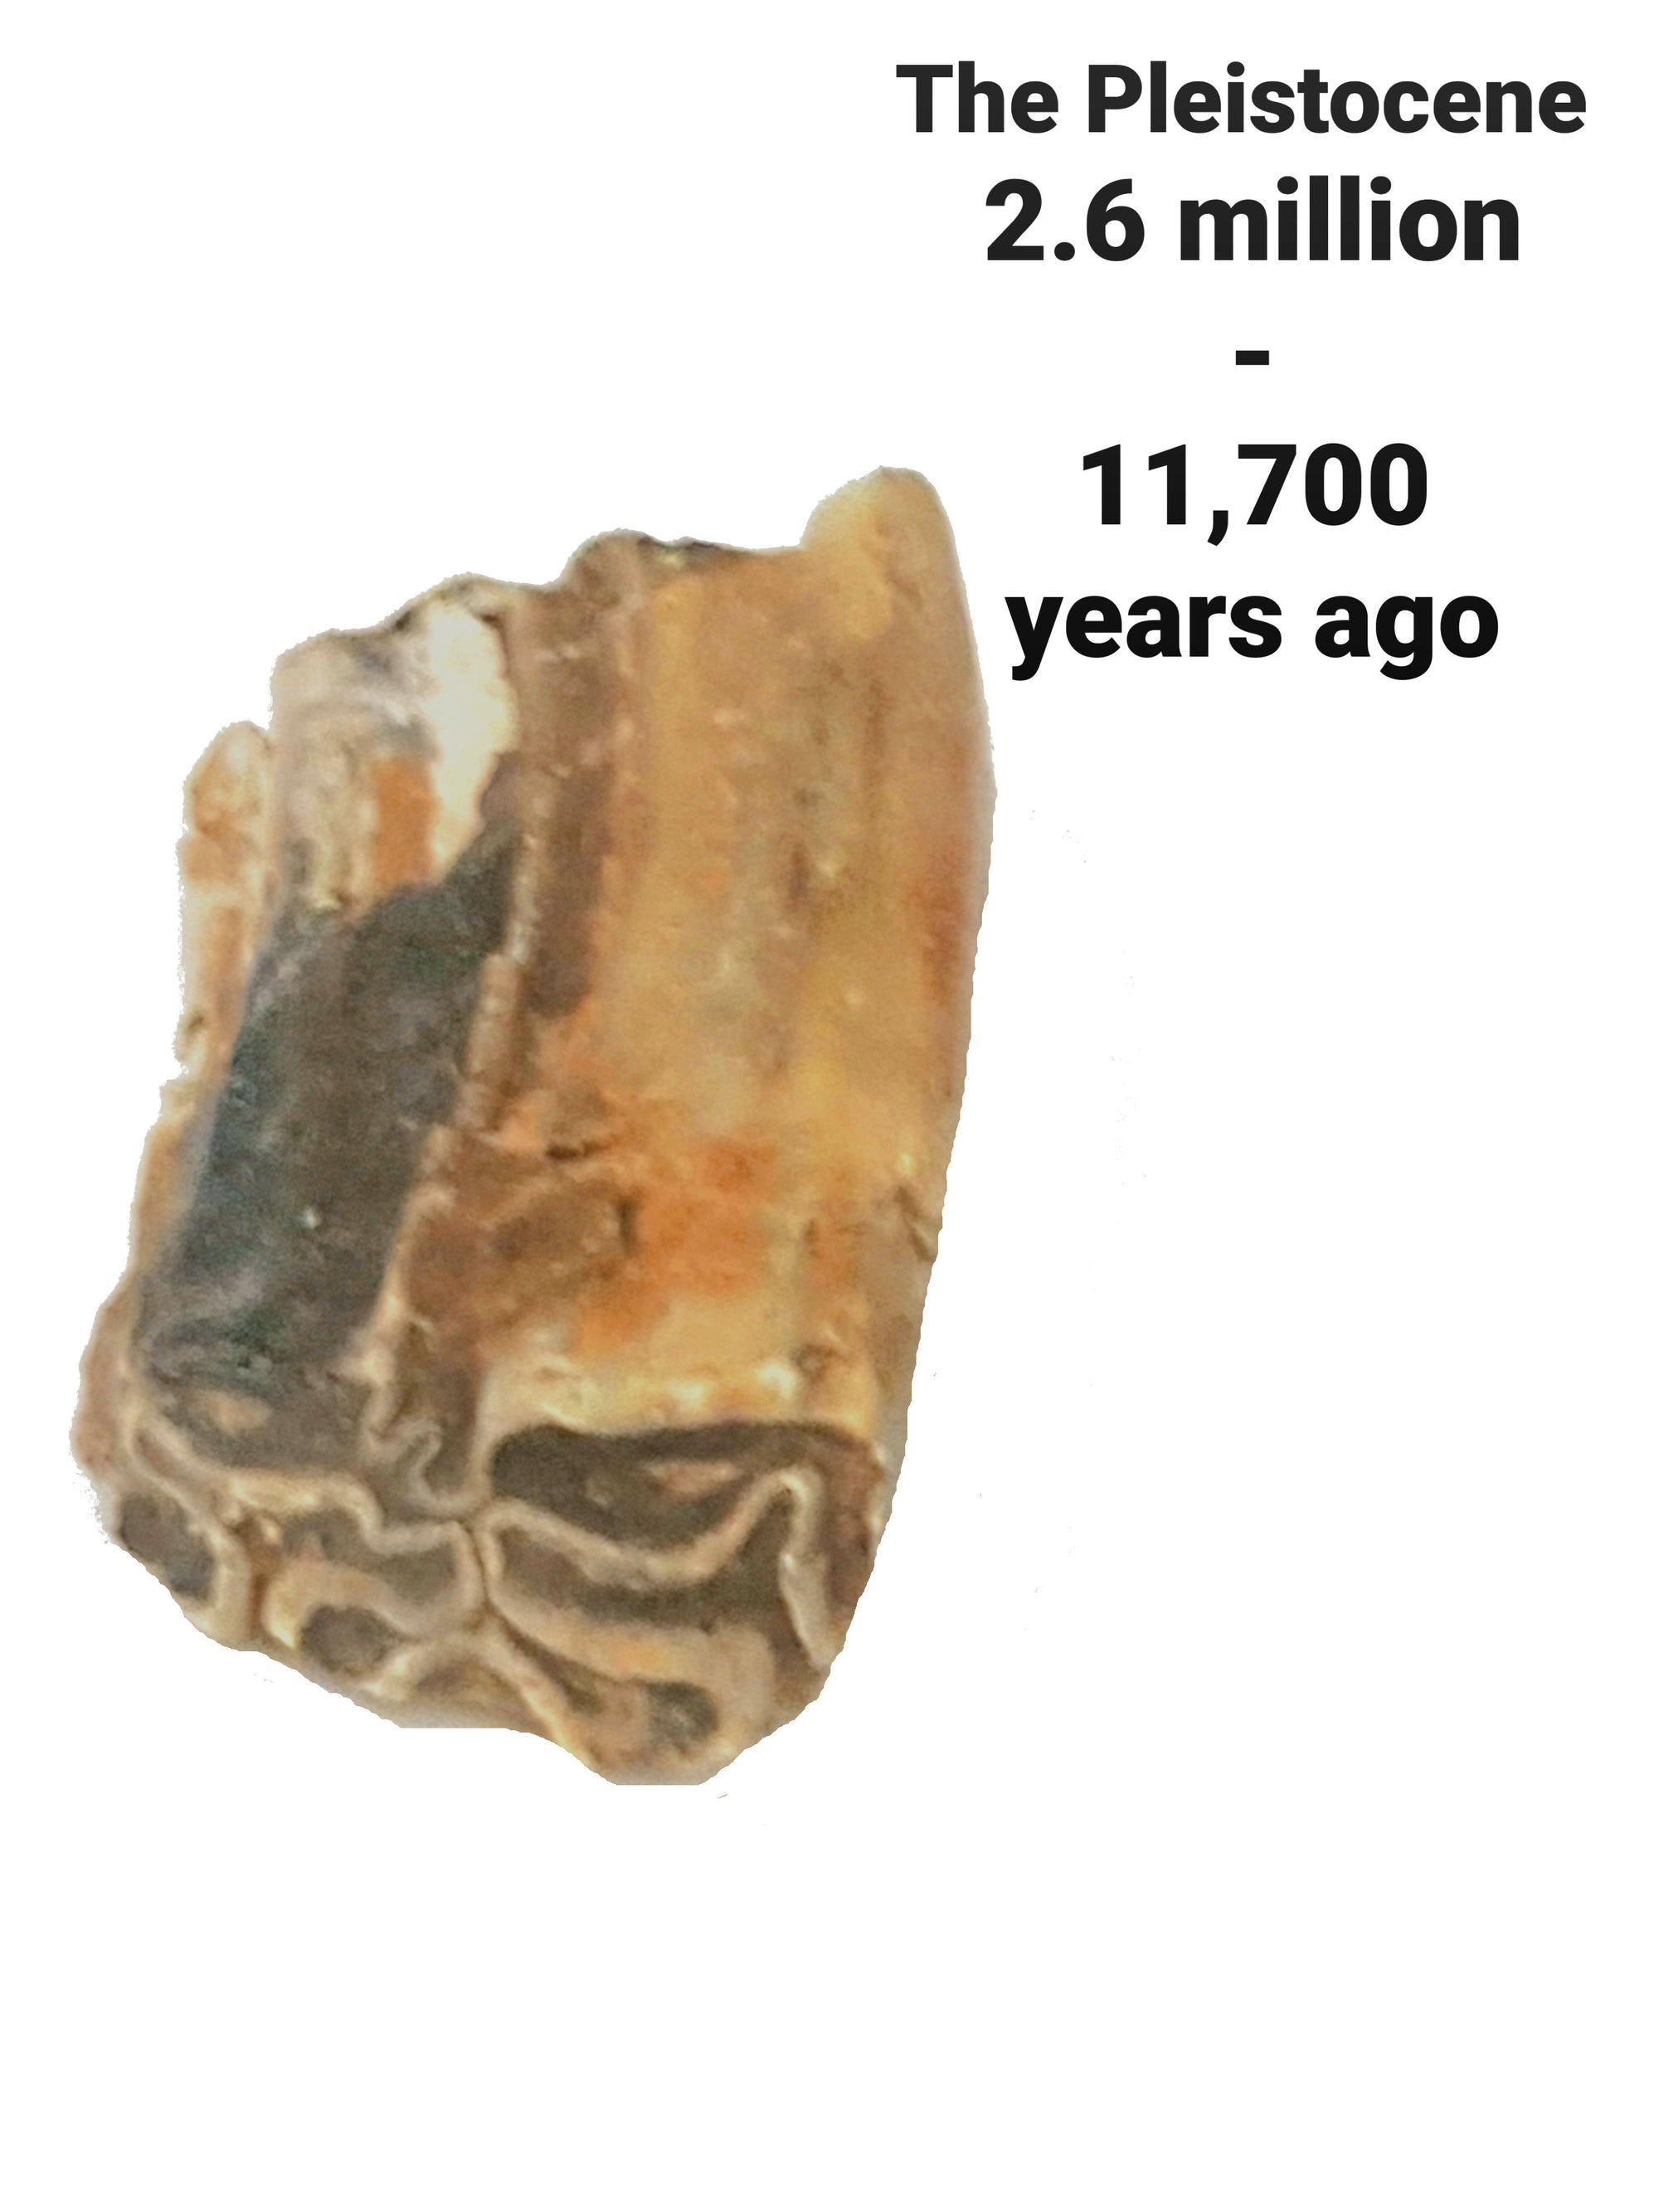 The Pleistocne. 2.6 million - 11,700 years ago. Image horse tooth